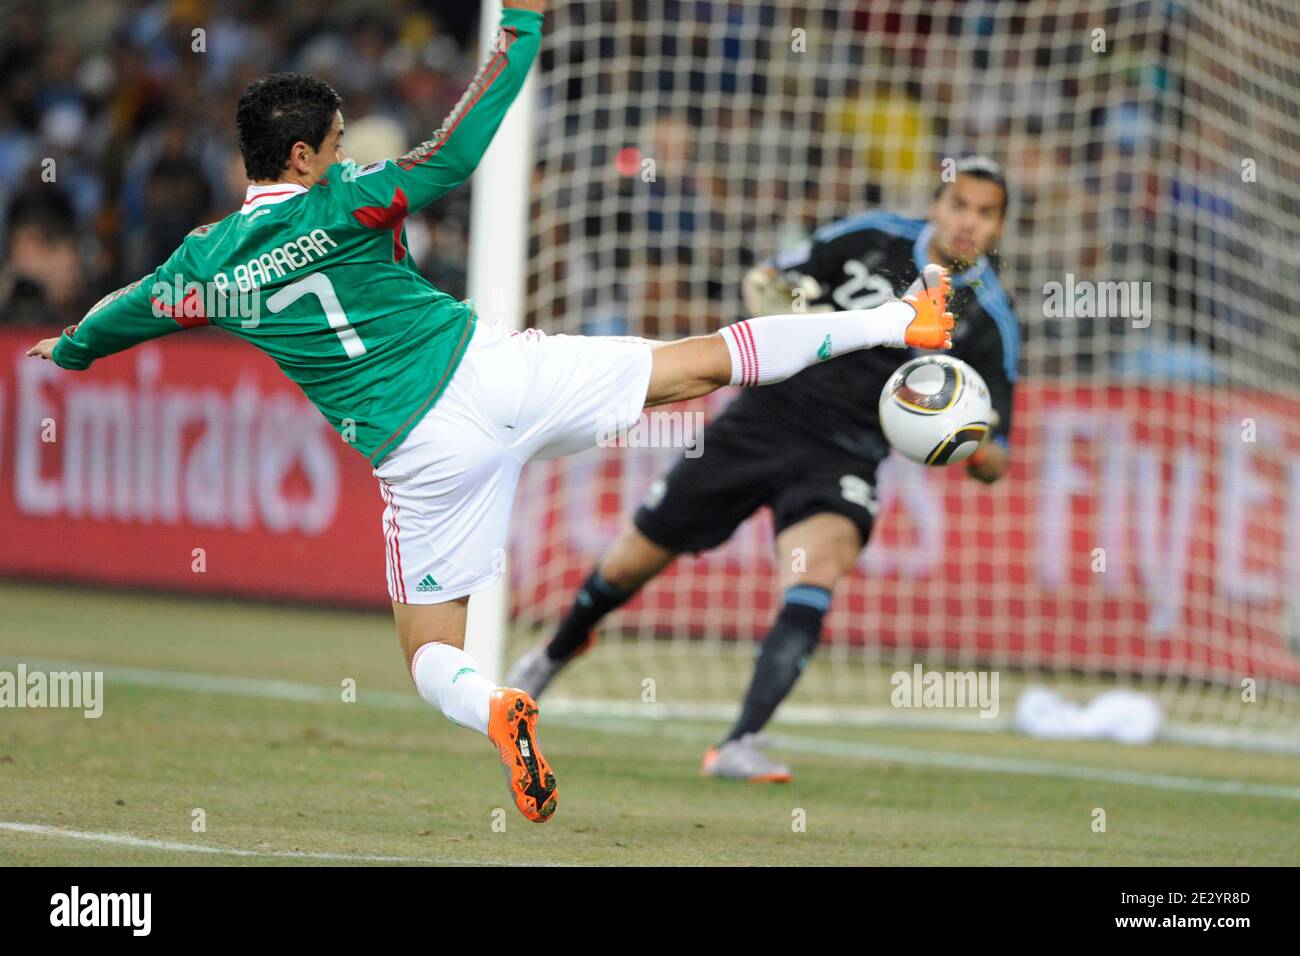 Mexico's Pablo Barrera during the 2010 FIFA World Cup South Africa 1/8 of final Soccer match, Argentina vs Mexico at Soccer City football stadium in Johannesburg, South Africa on June 27, 2010. Argentina won 3-1. Photo by Henri Szwarc/ABACAPRESS.COM Stock Photo